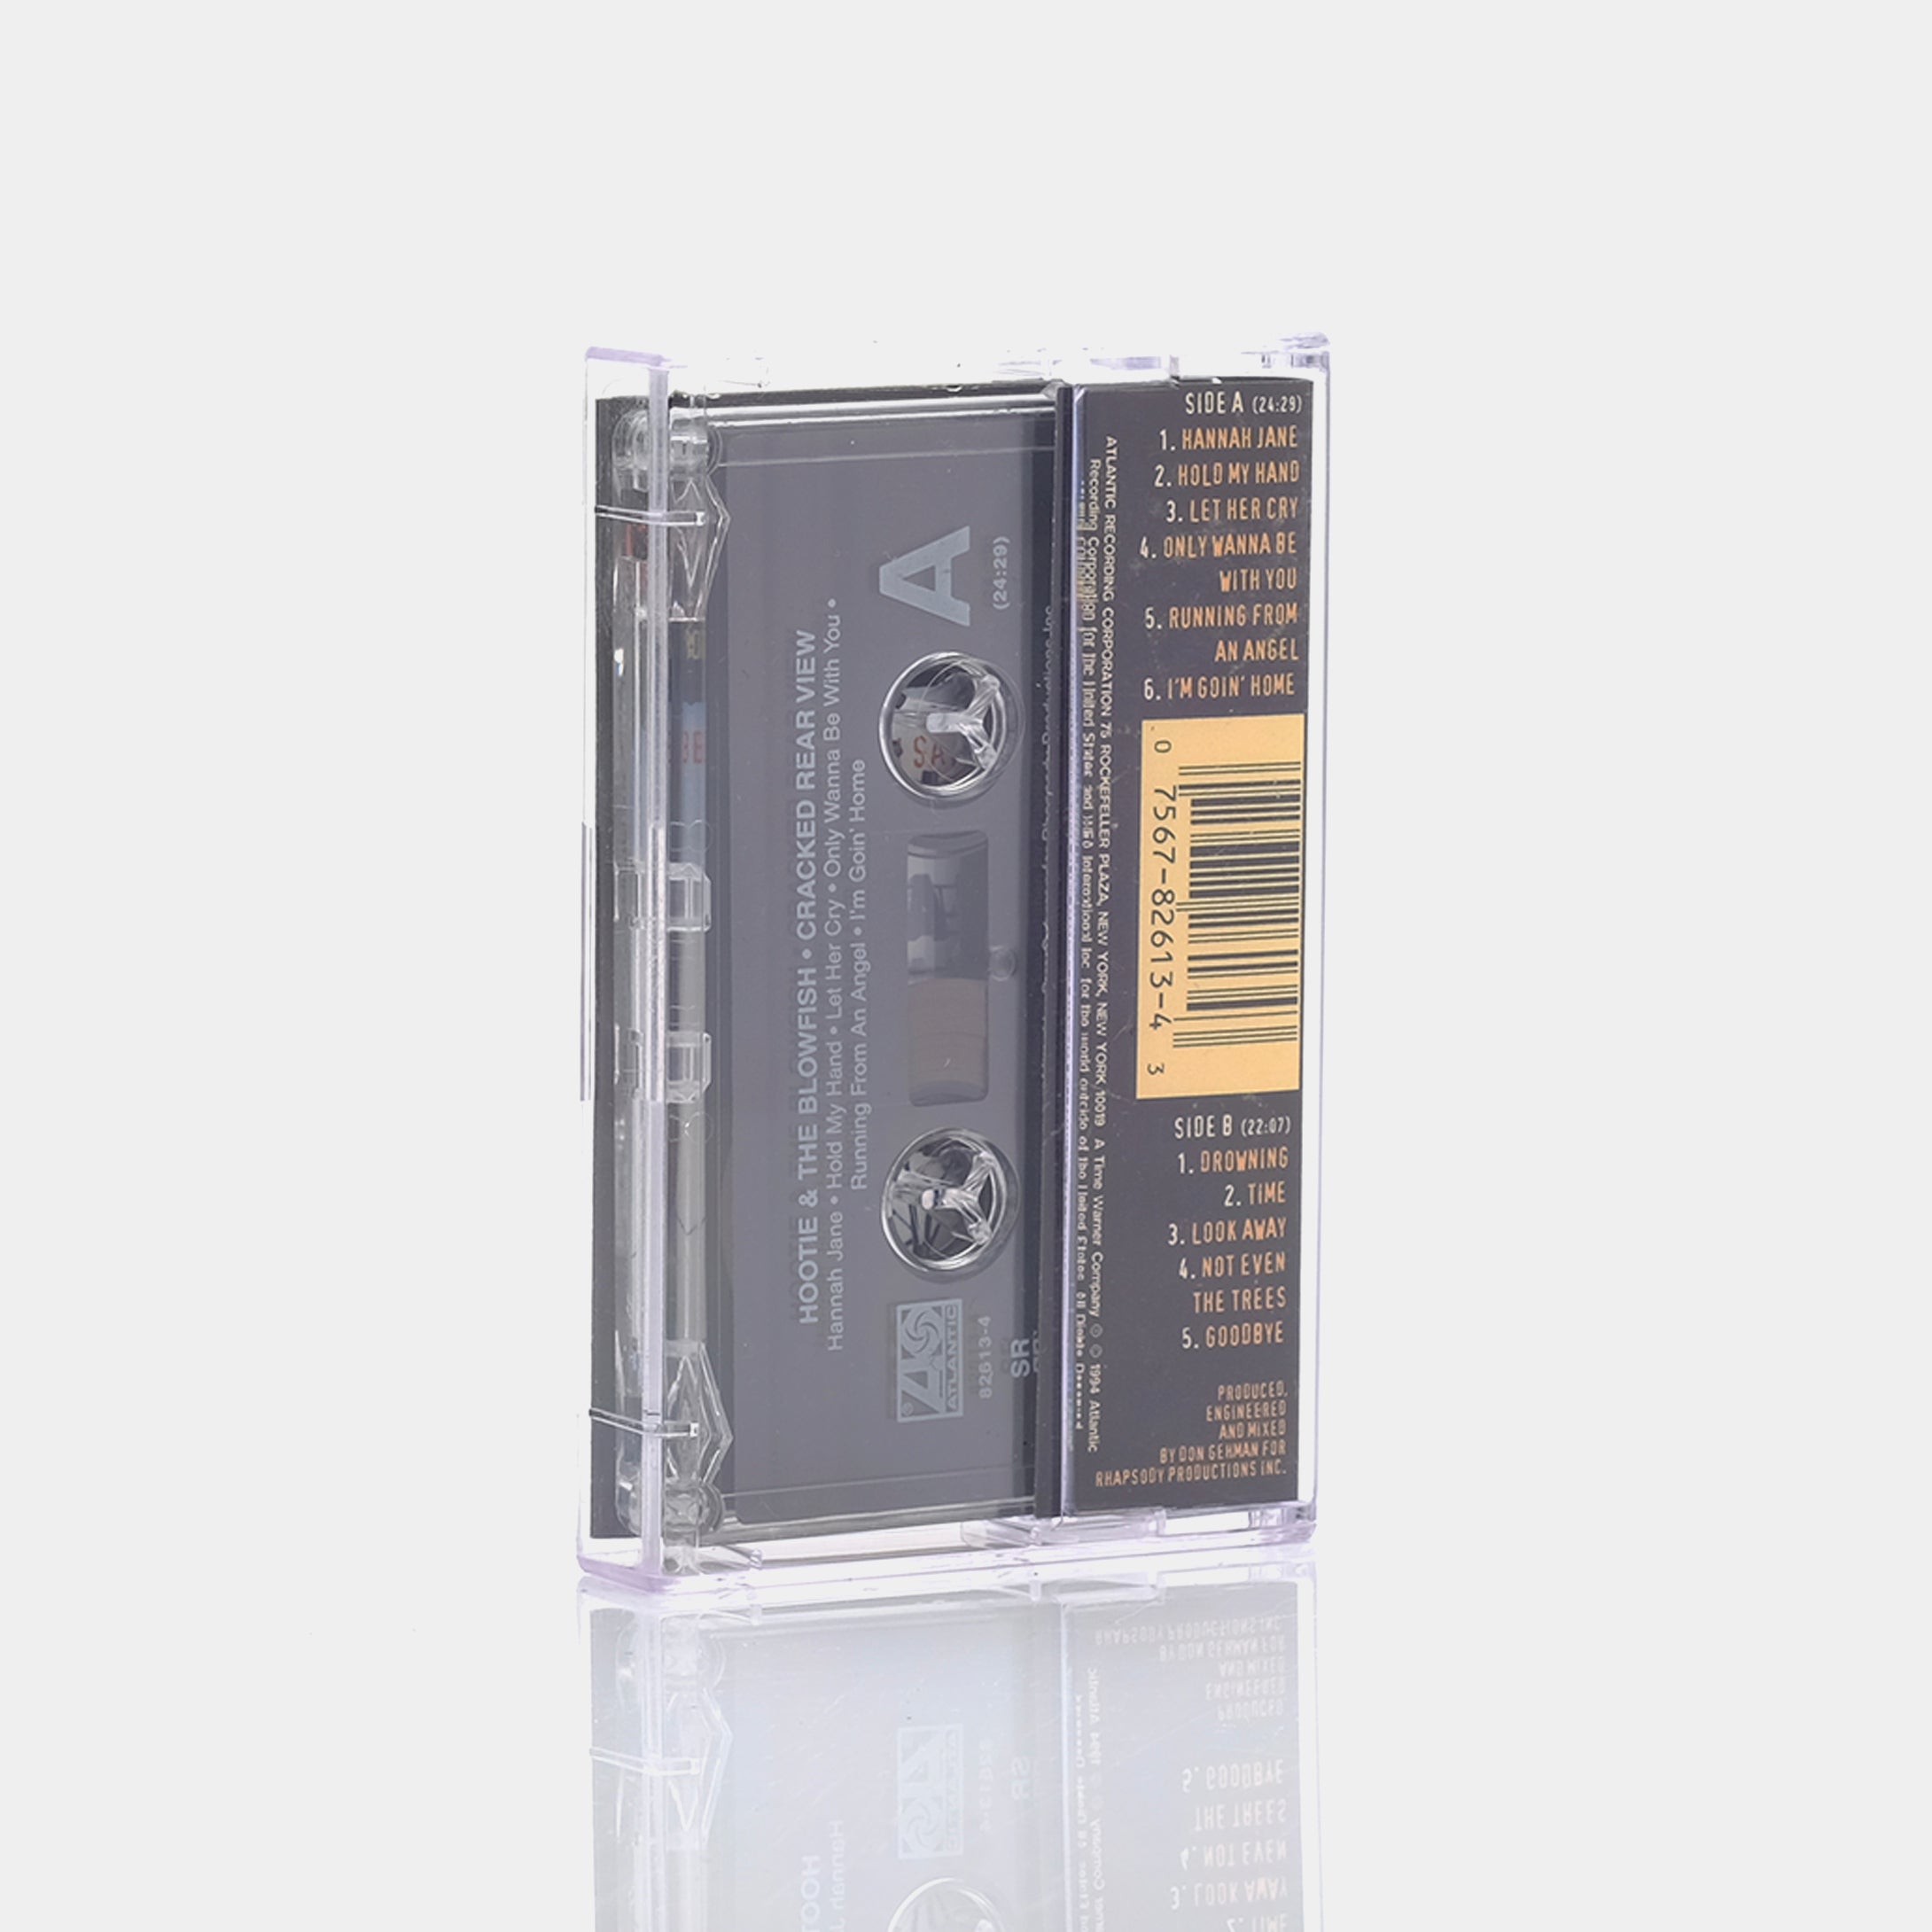 Hootie & The Blowfish - Cracked Rear View Cassette Tape